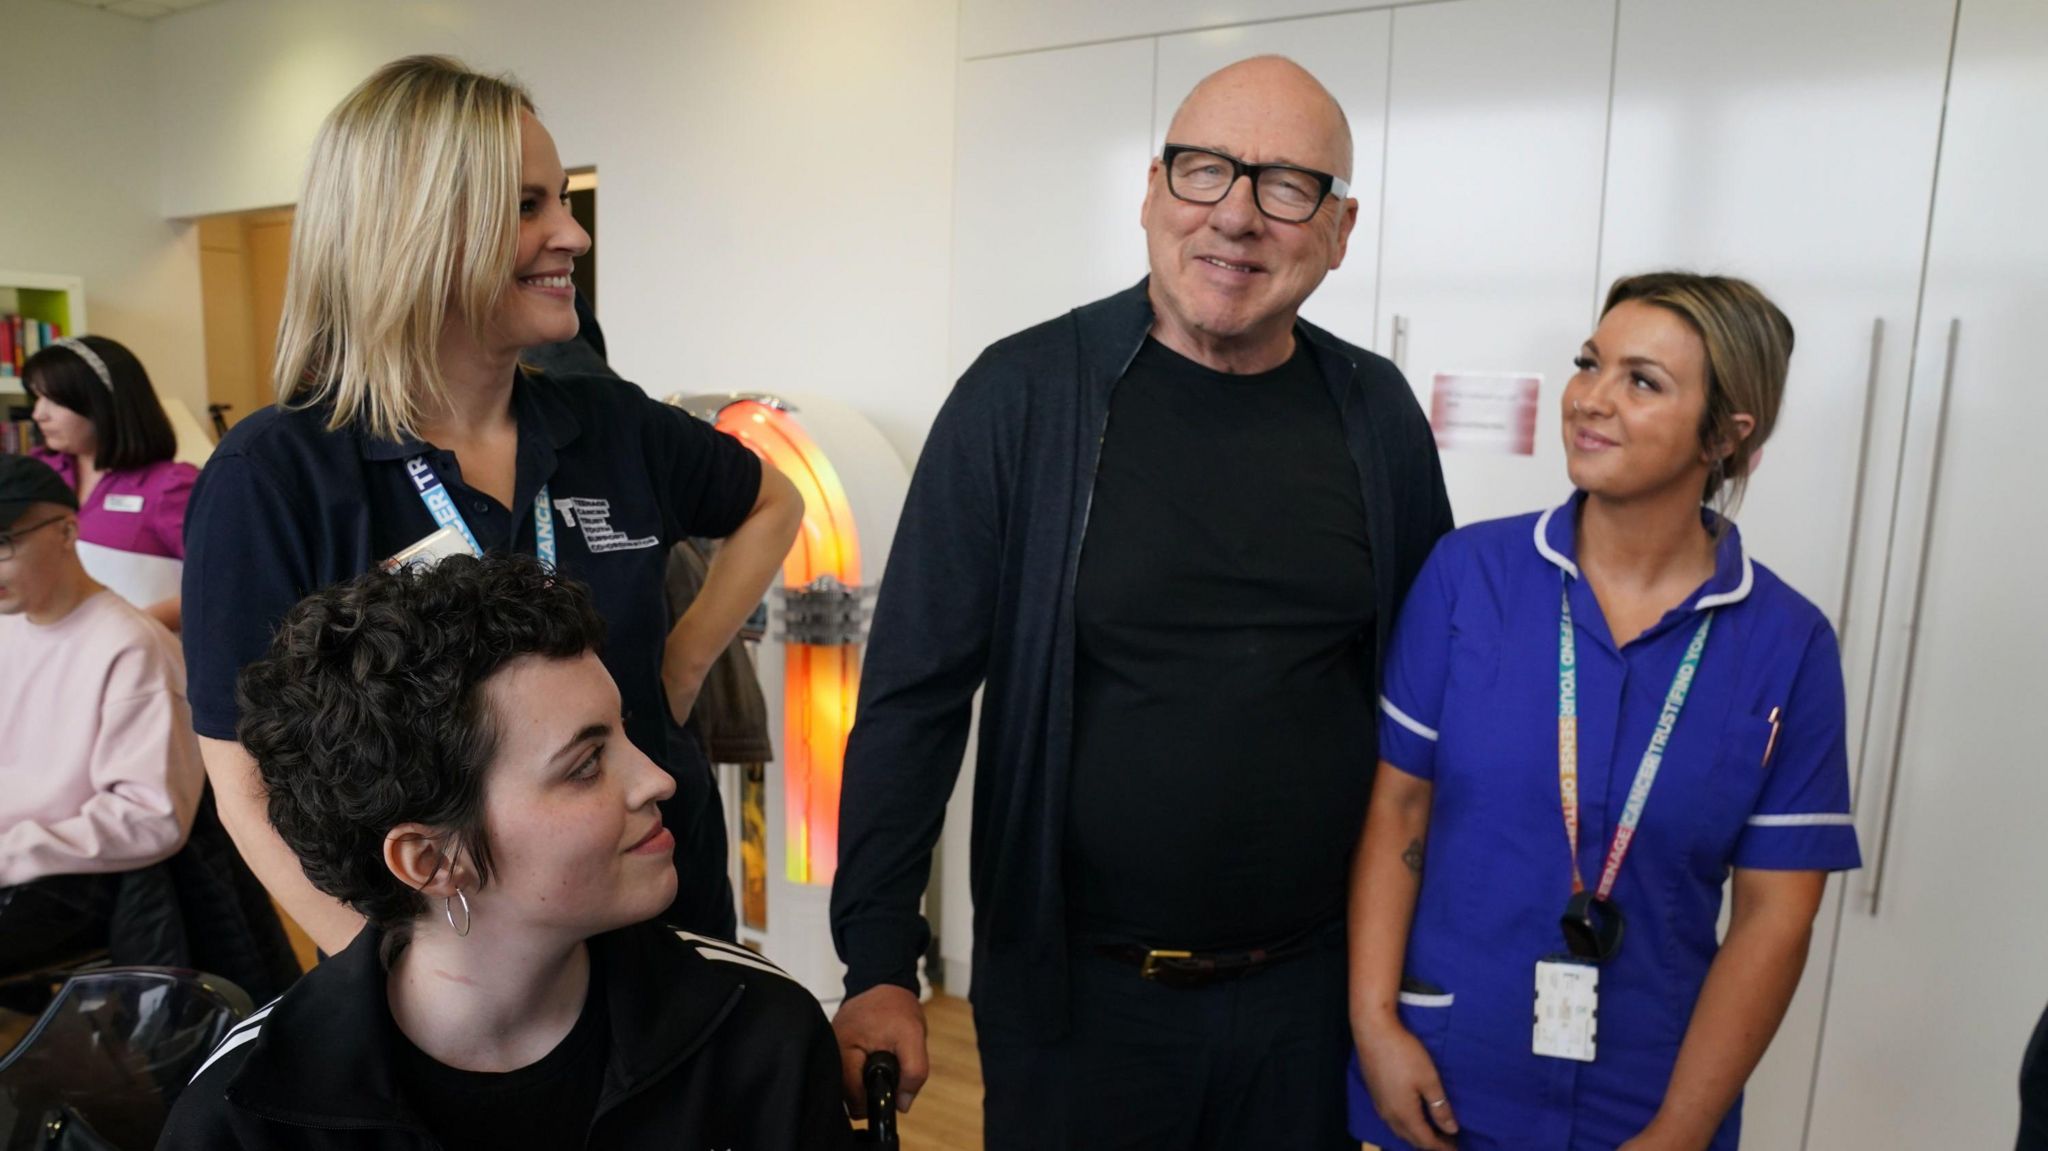 Mark Knoplfer with nurses and staff at the RVI in Newcastle